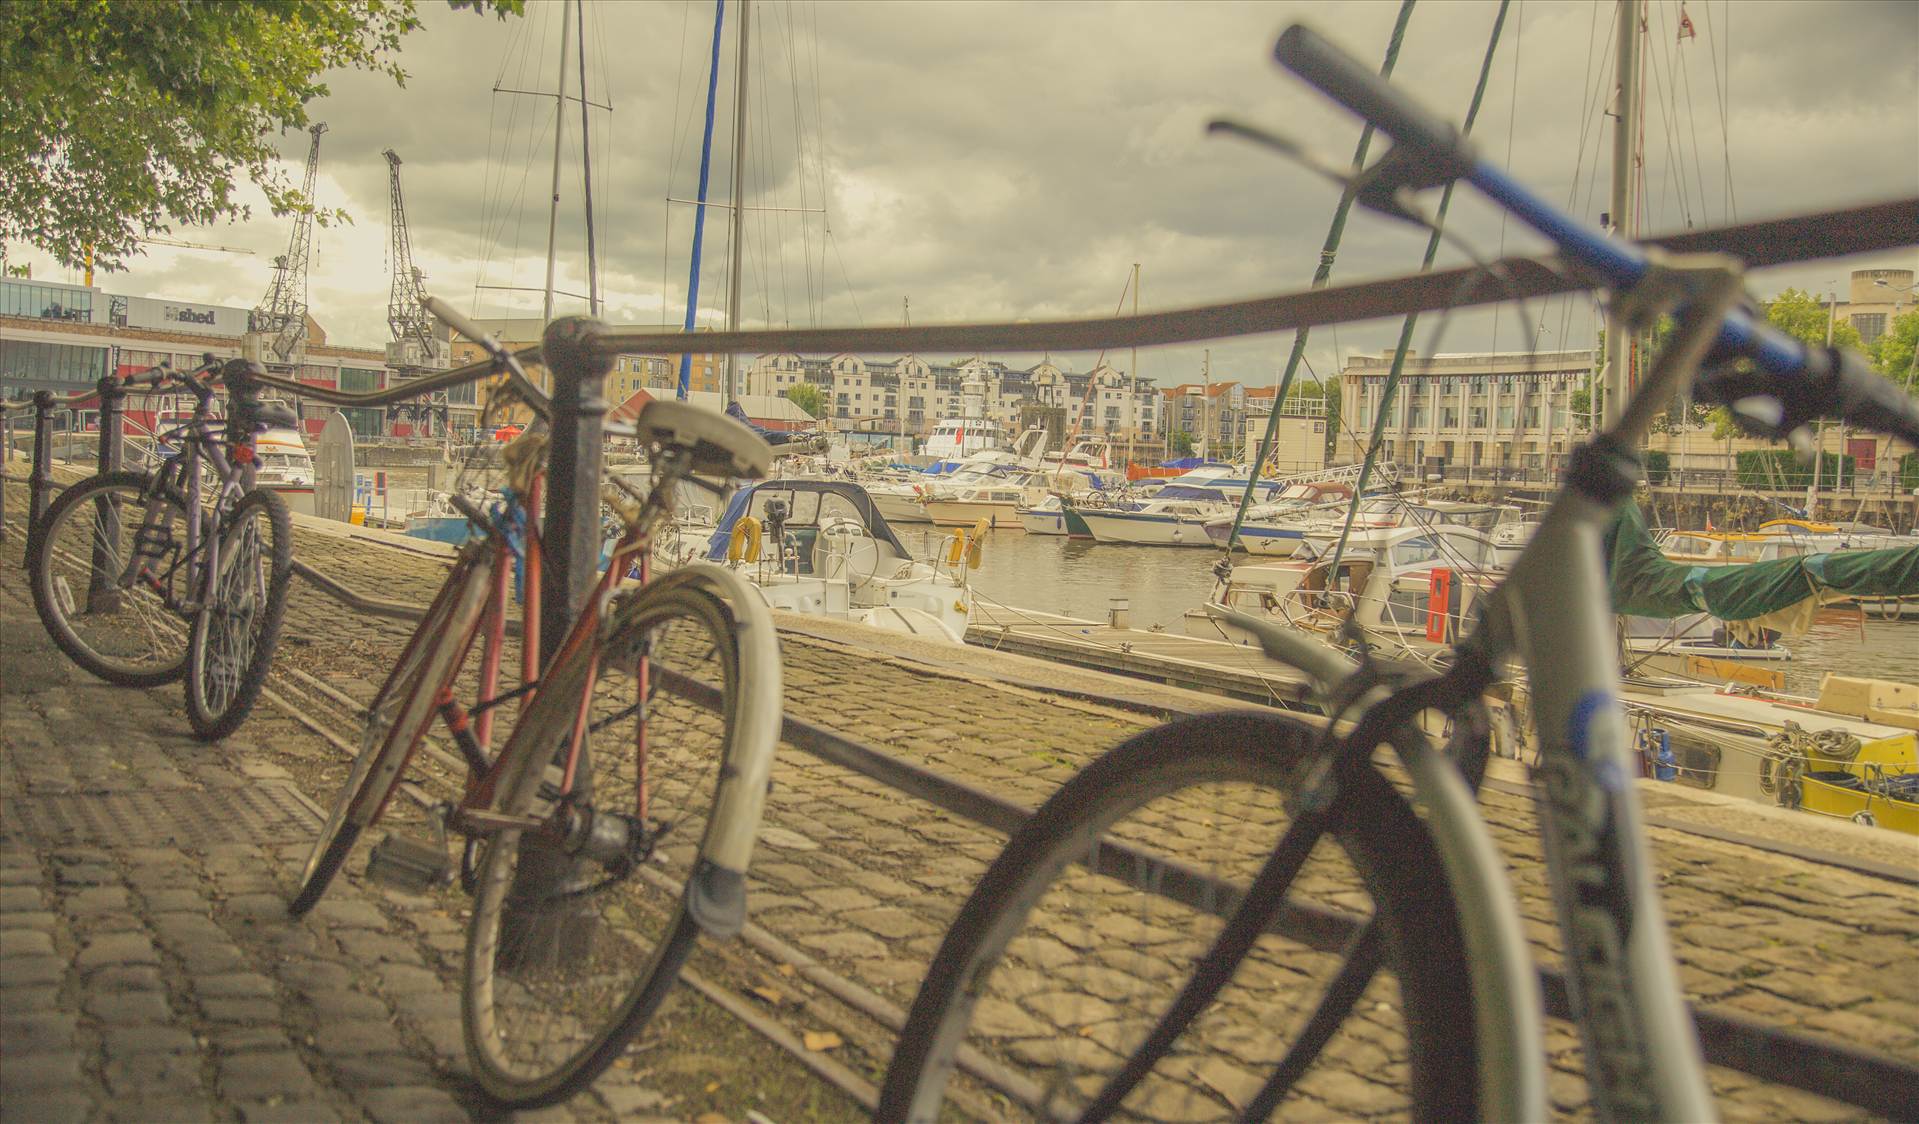 Bicycles at Harbourside.jpg  by WPC-187